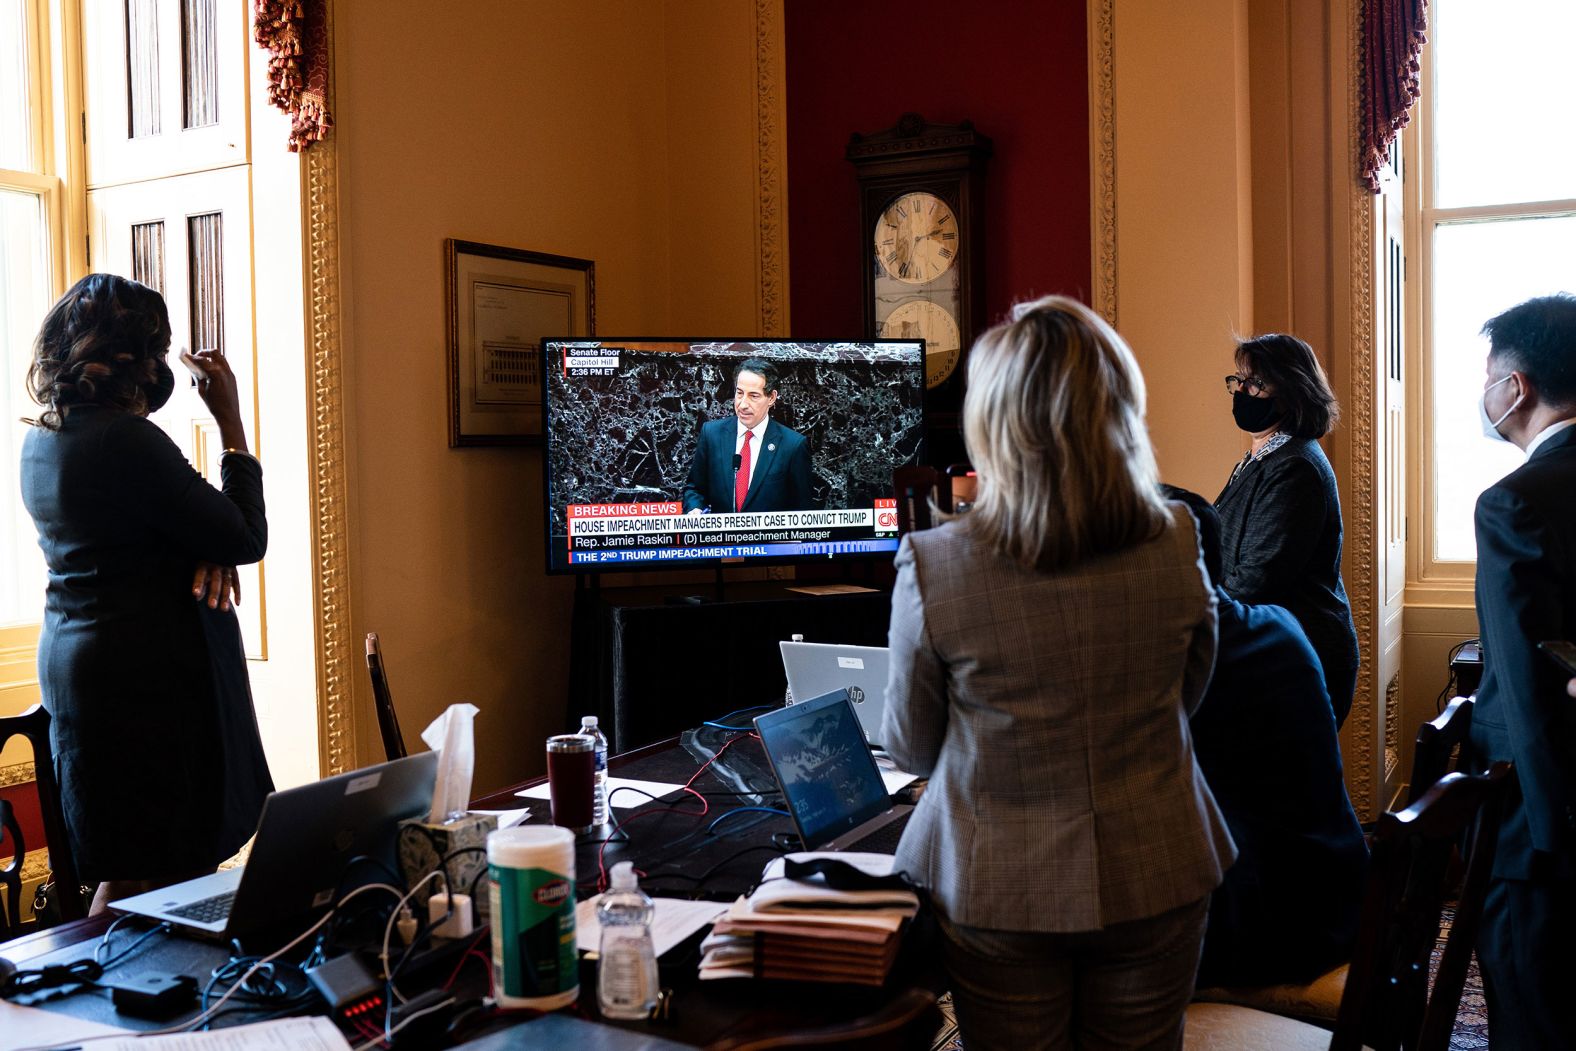 House impeachment managers watch US Rep. Jamie Raskin, the lead impeachment manager, deliver remarks on Tuesday. Raskin, a Democrat from Maryland, <a href="index.php?page=&url=https%3A%2F%2Fwww.cnn.com%2F2021%2F02%2F09%2Fpolitics%2Fjamie-raskin-impeachment-trump-senate-trial%2Findex.html" target="_blank">delivered a tearful account of his experience</a> during last month's insurrection, charging that the deadly episode "cannot be the future of America."